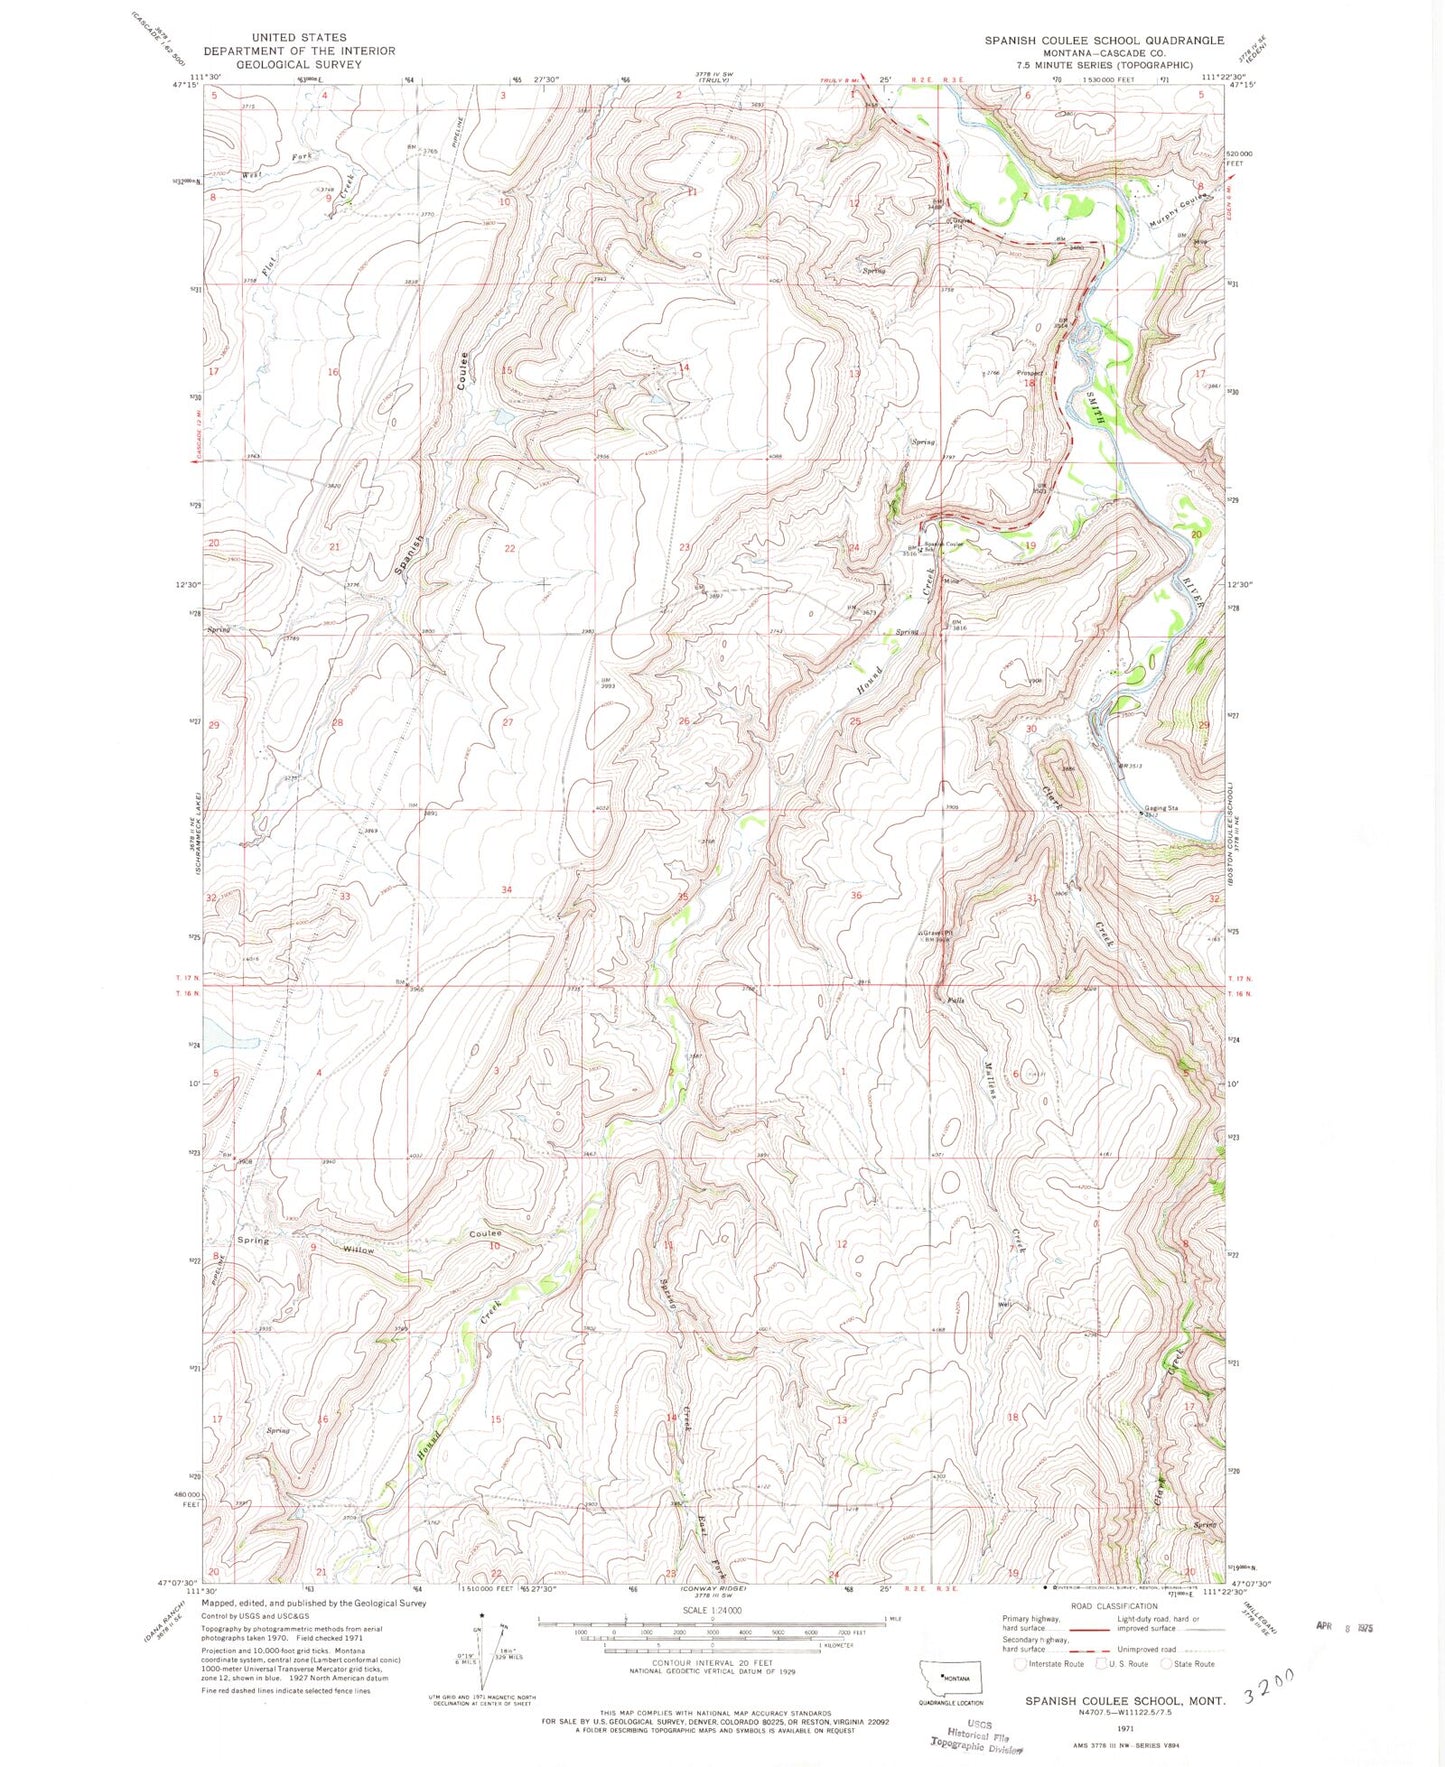 Classic USGS Spanish Coulee School Montana 7.5'x7.5' Topo Map Image